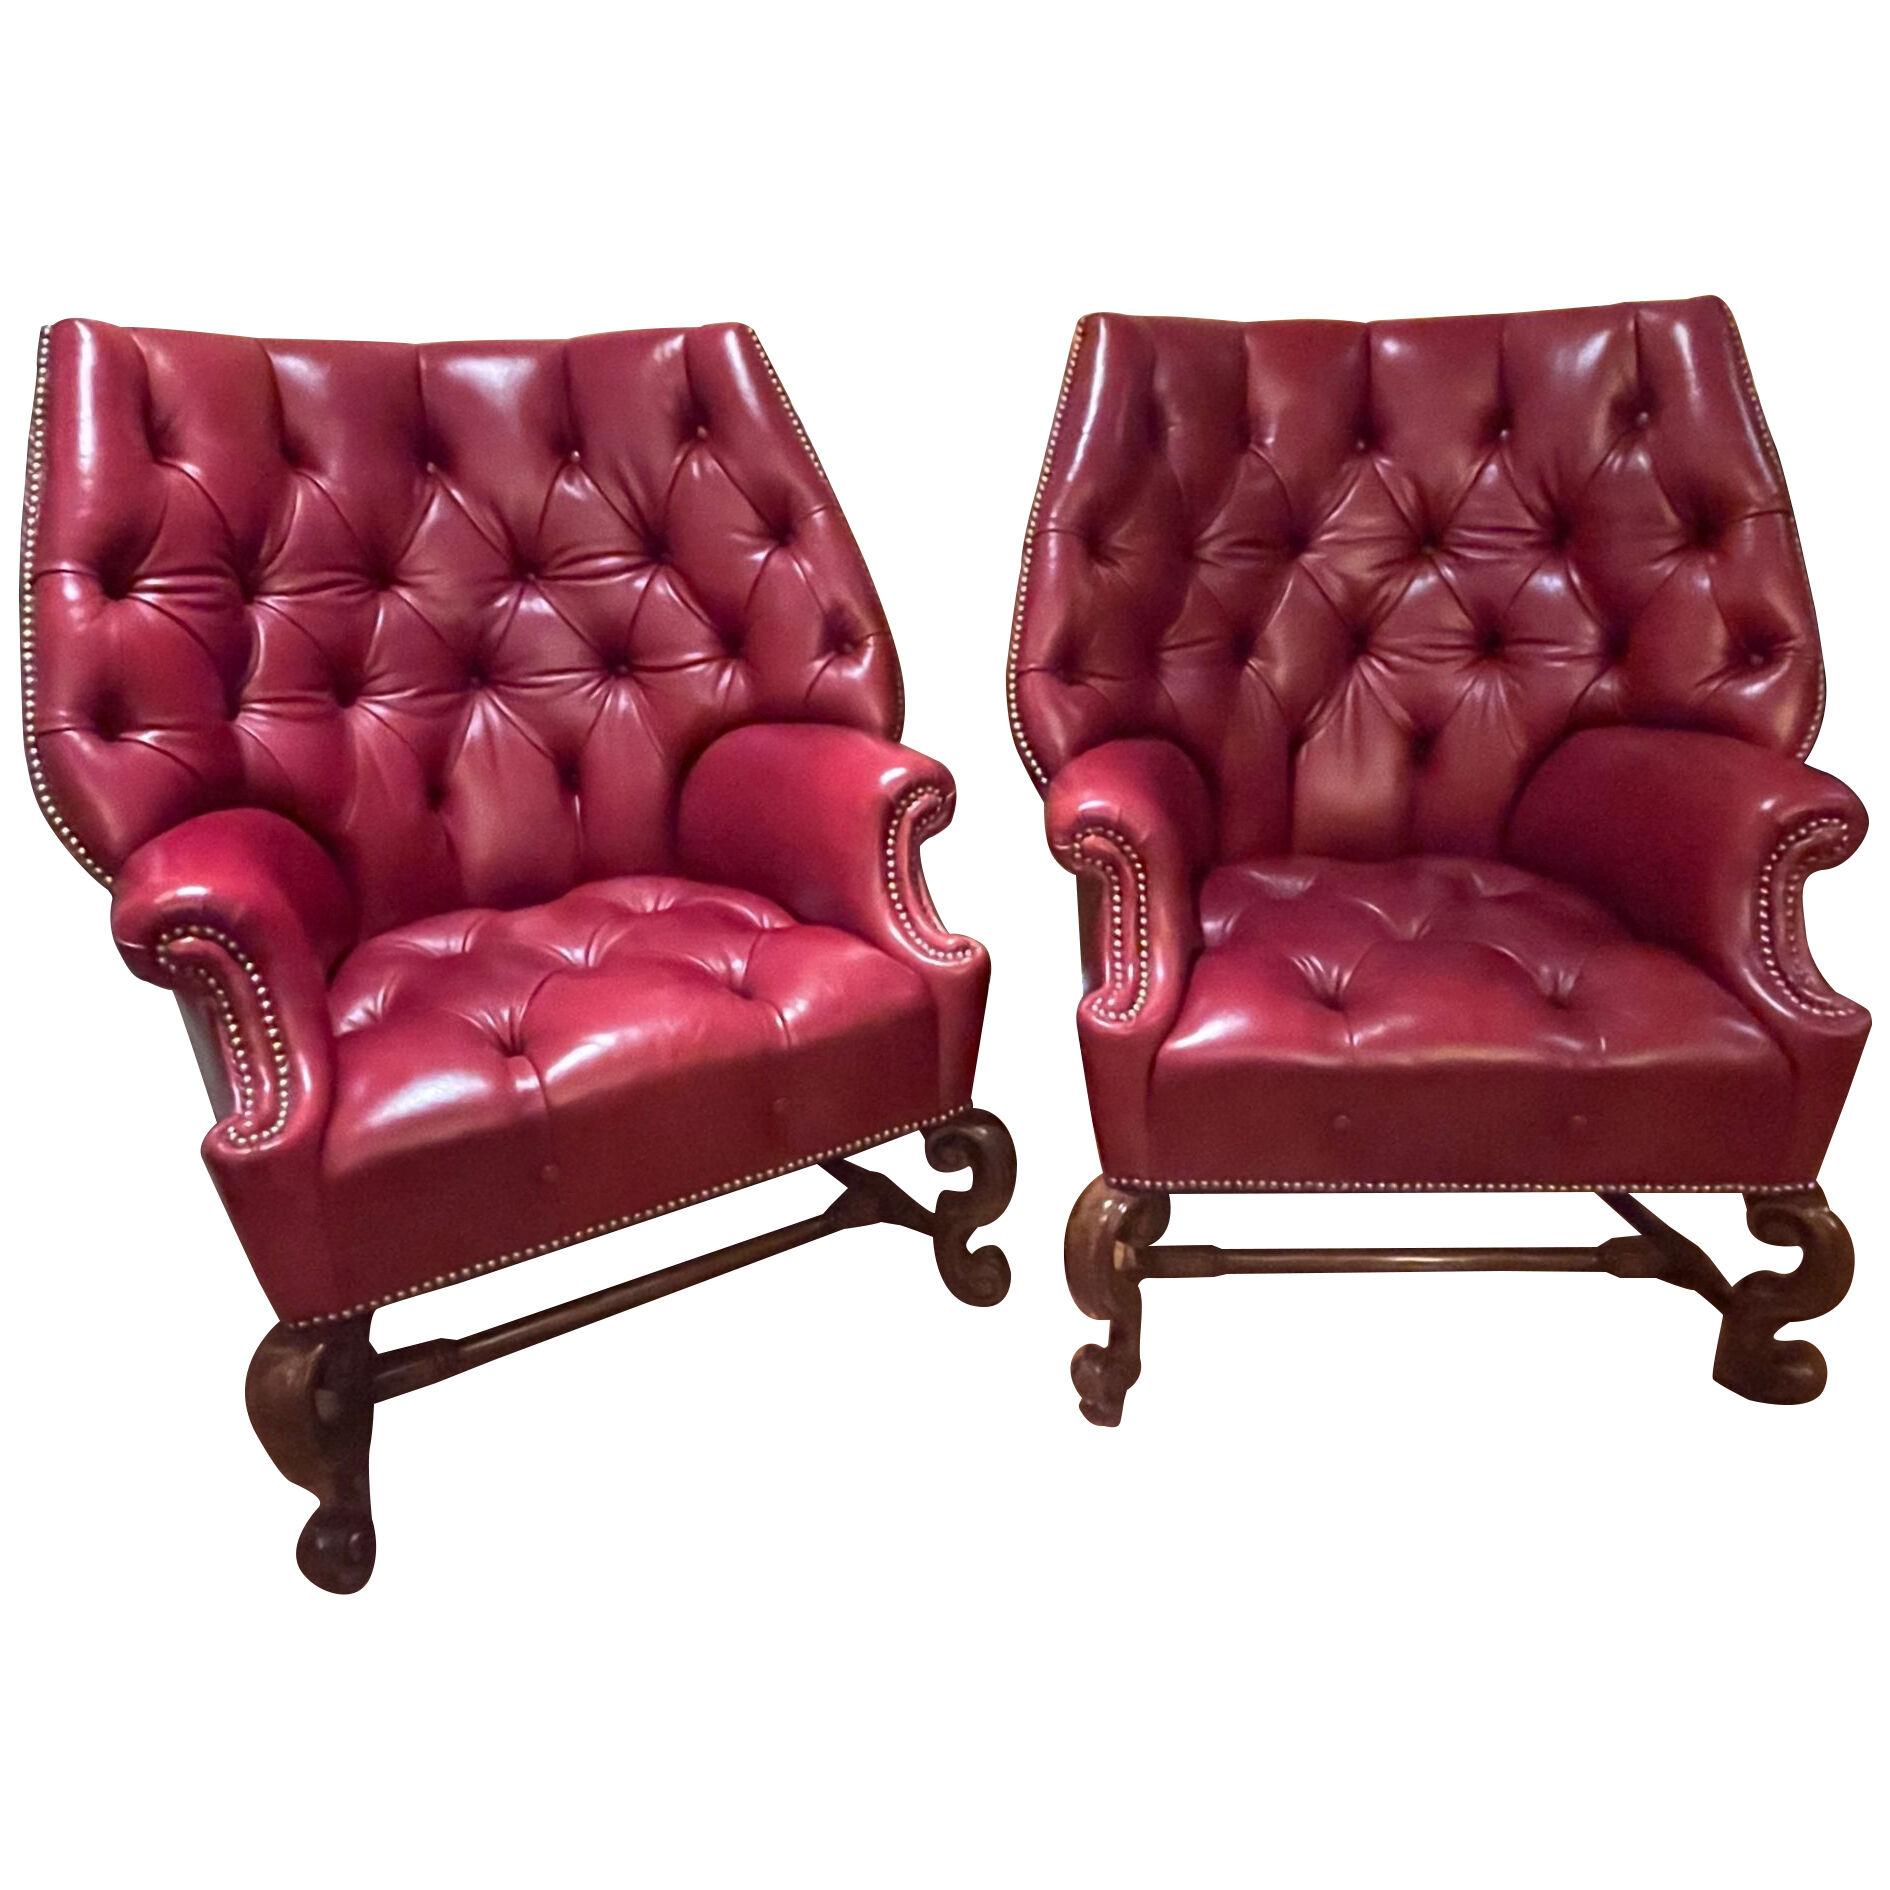 Pair Oversized Tufted Leather Wingback Lounge Chairs, Georgian, Finest Quality